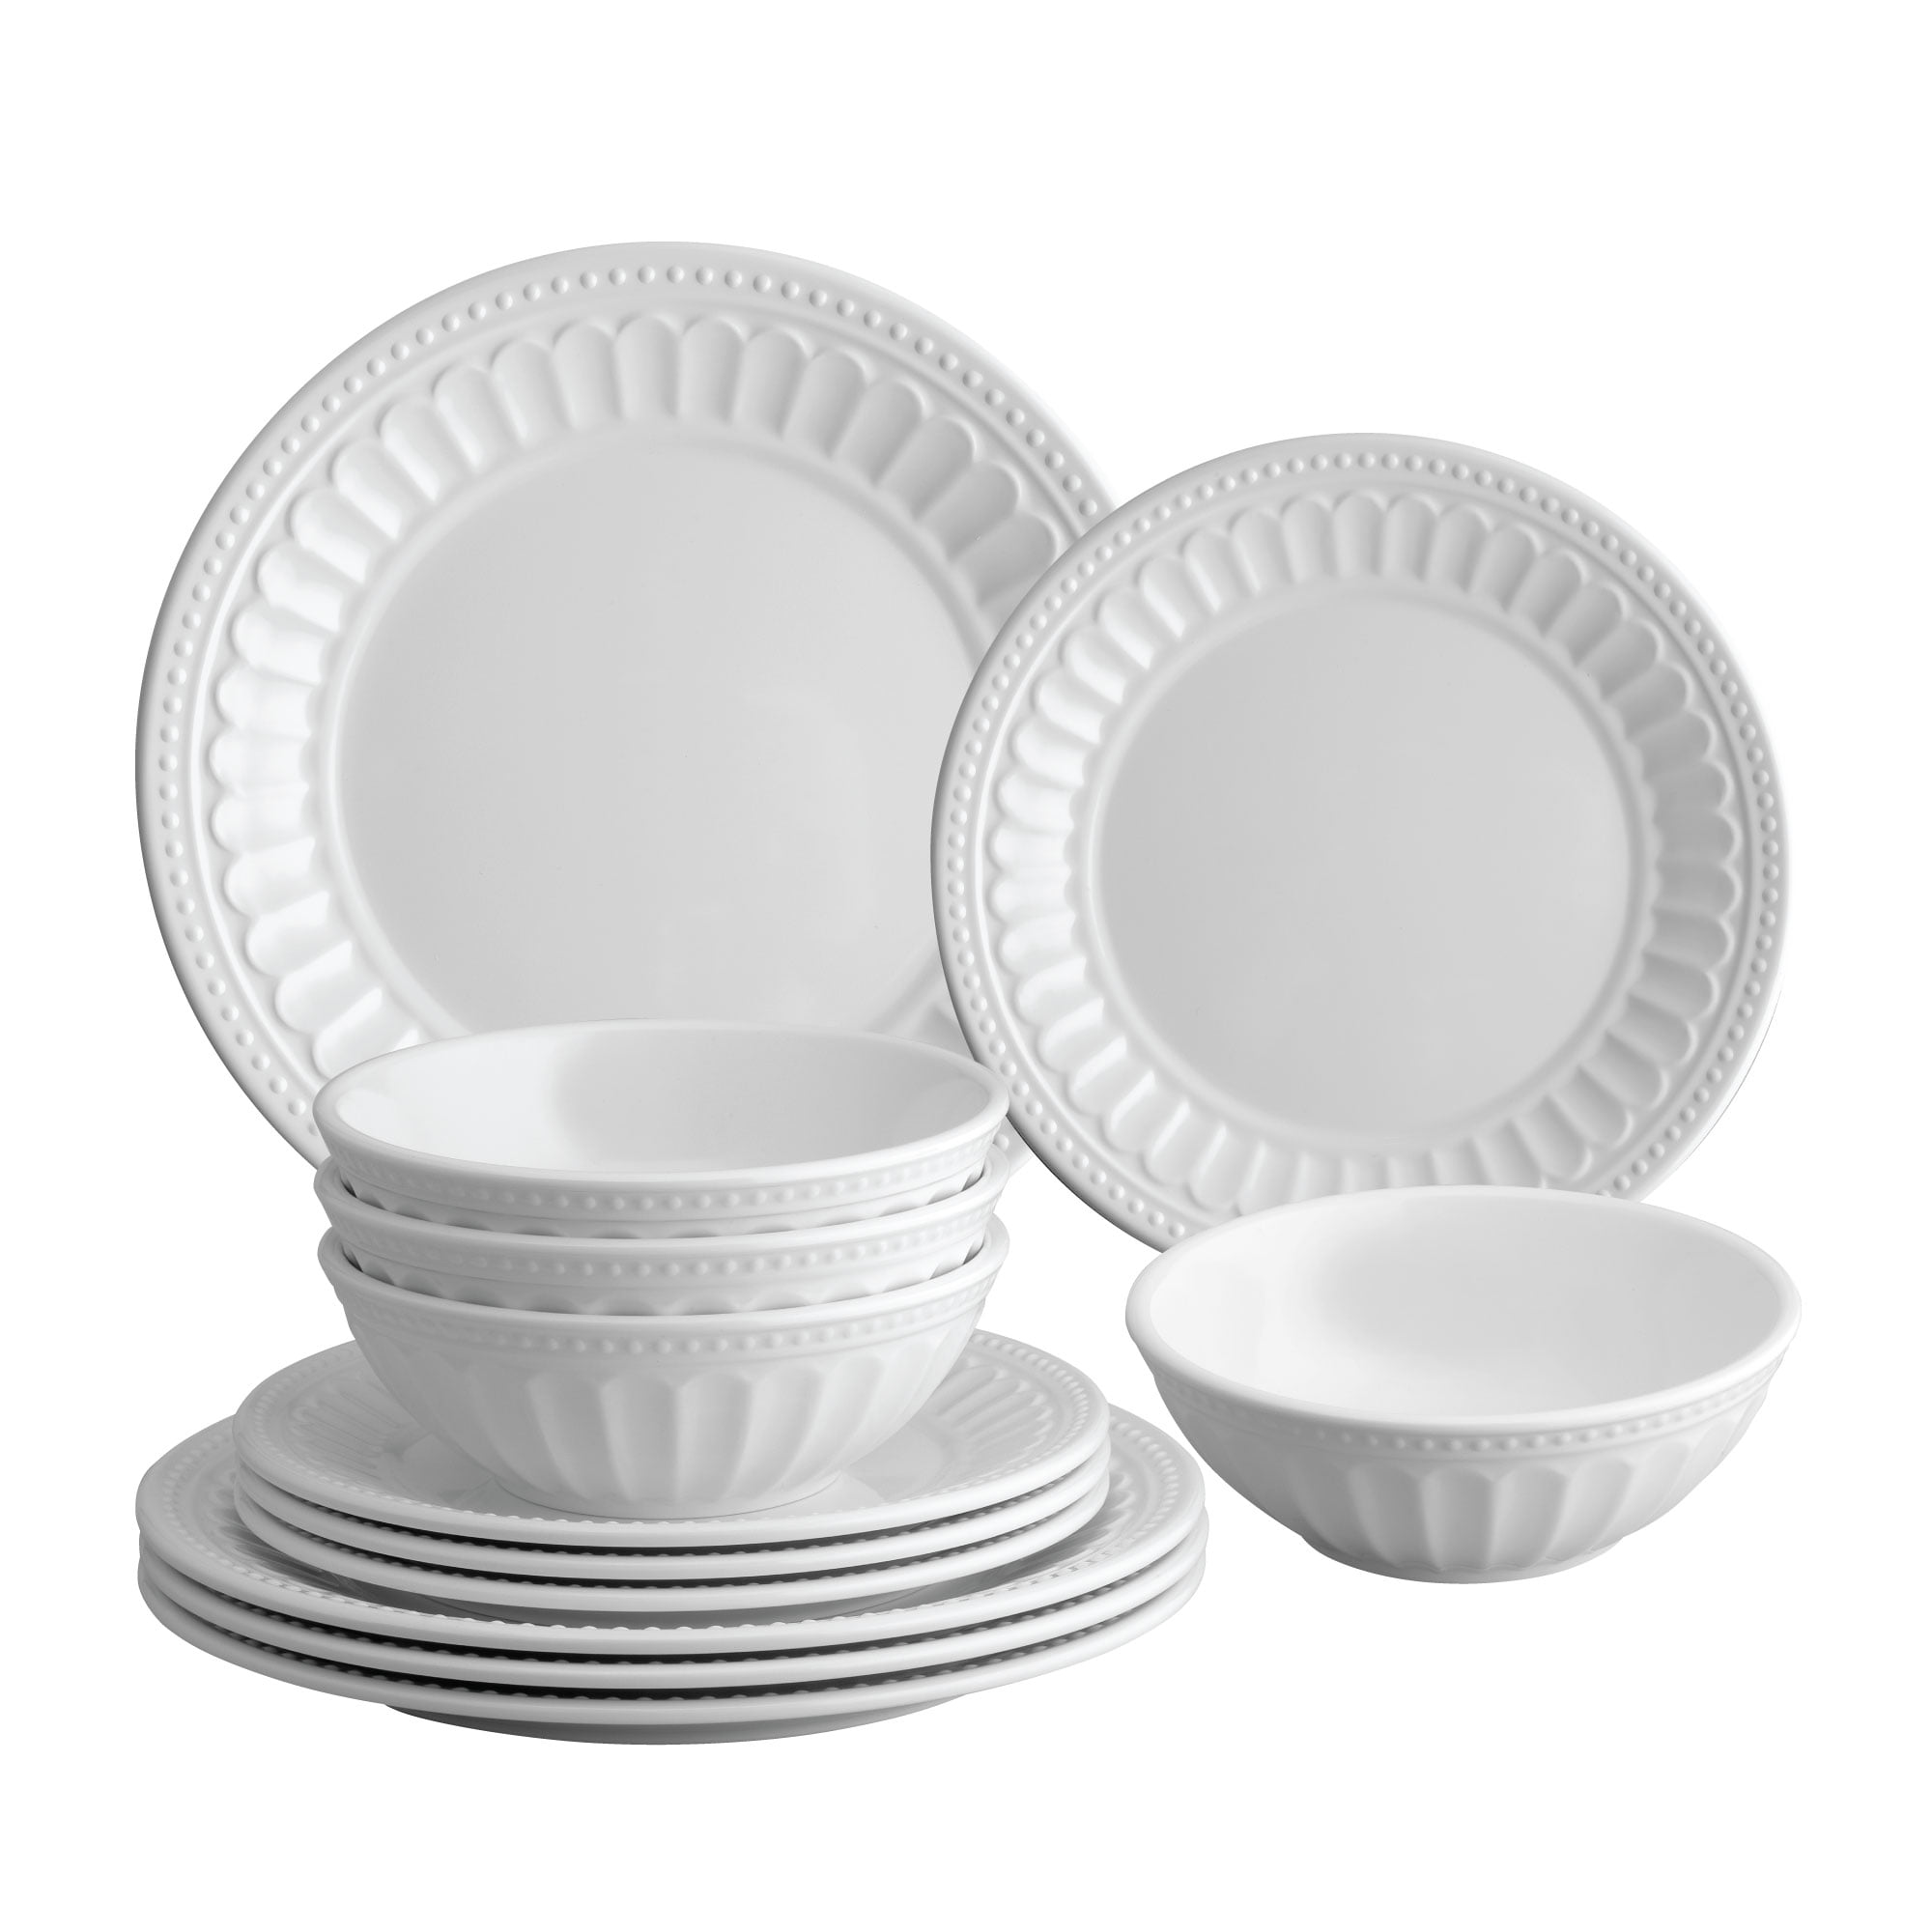 Salad Plates and Bowls Includes Dinner Plates Service for 4 Gourmet Art 12-Piece Beaded Heavyweight and Durable Melamine Dinnerware Set for Indoors Outdoors Use and Everyday Use. 